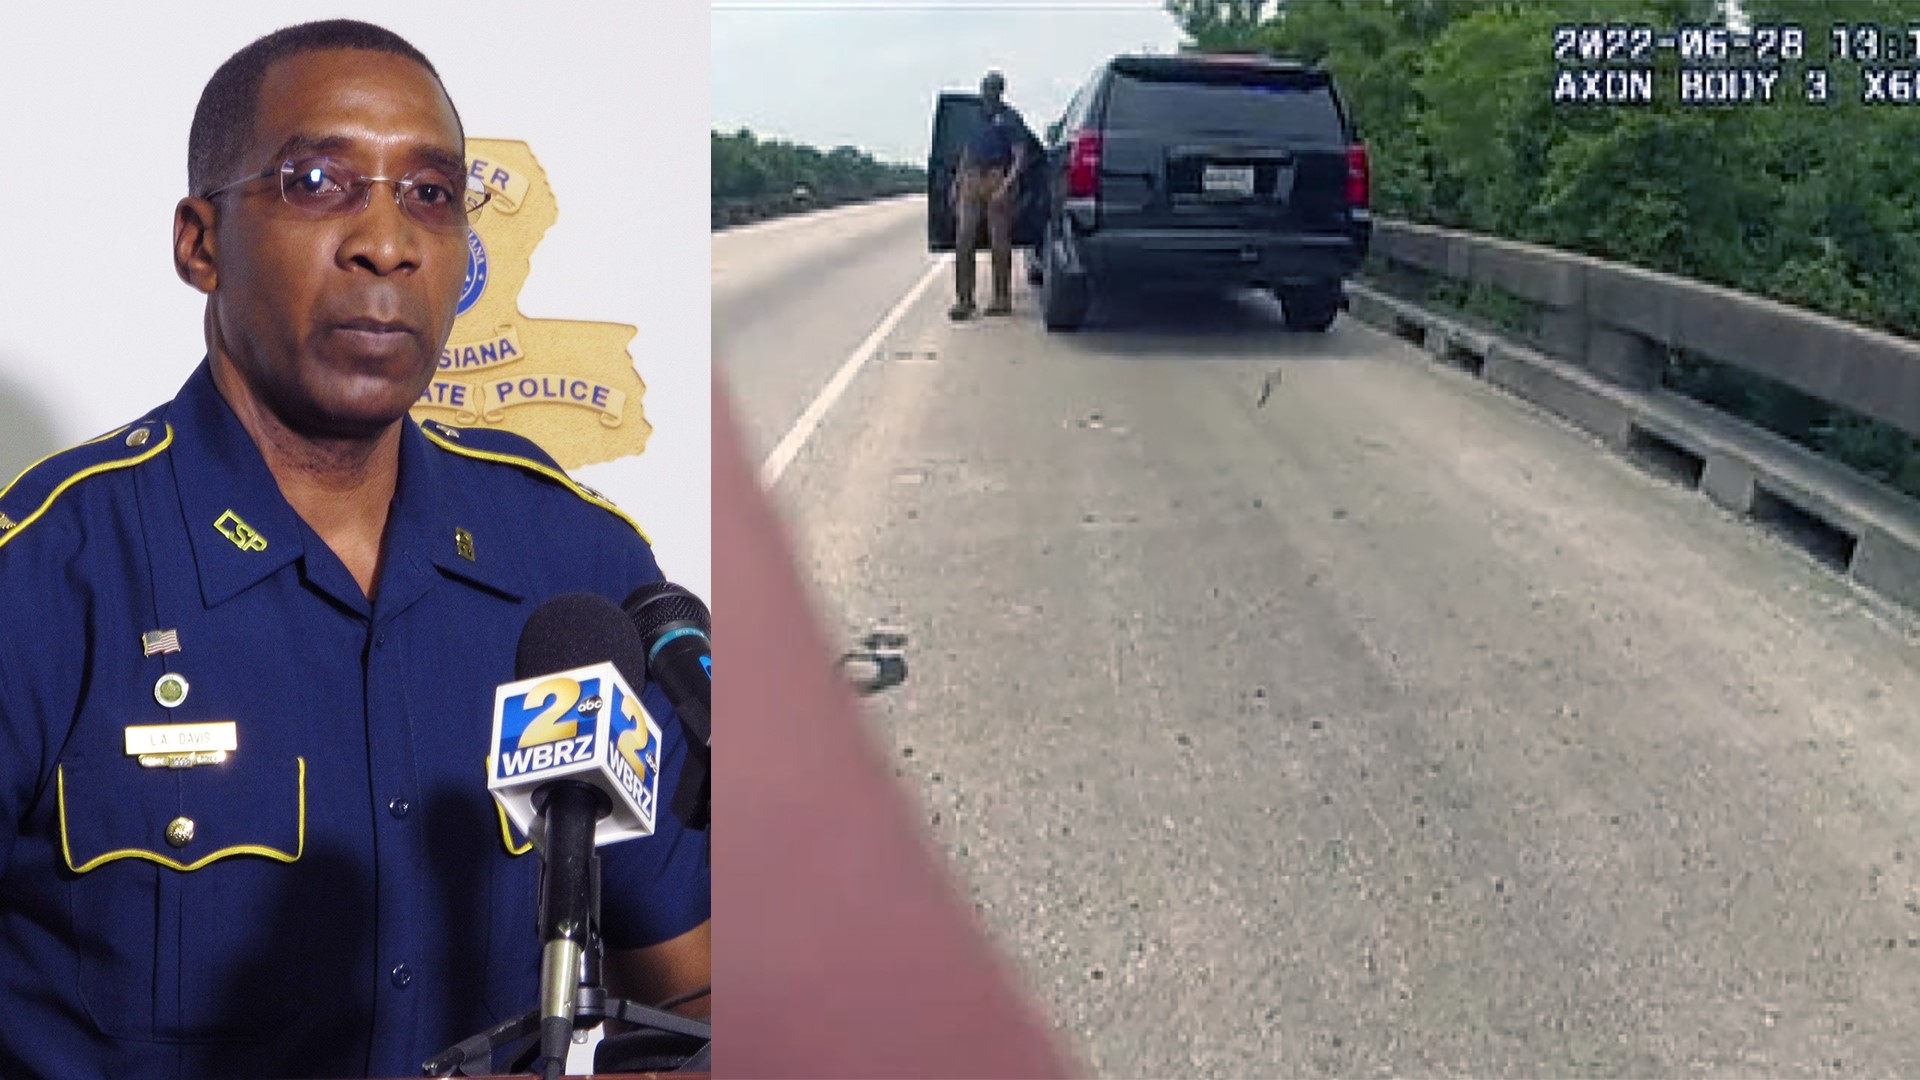 “Well, I’ll be,” said the trooper who pulled over State Police Colonel Lamar Davis. The utterance was heard on body cam video.